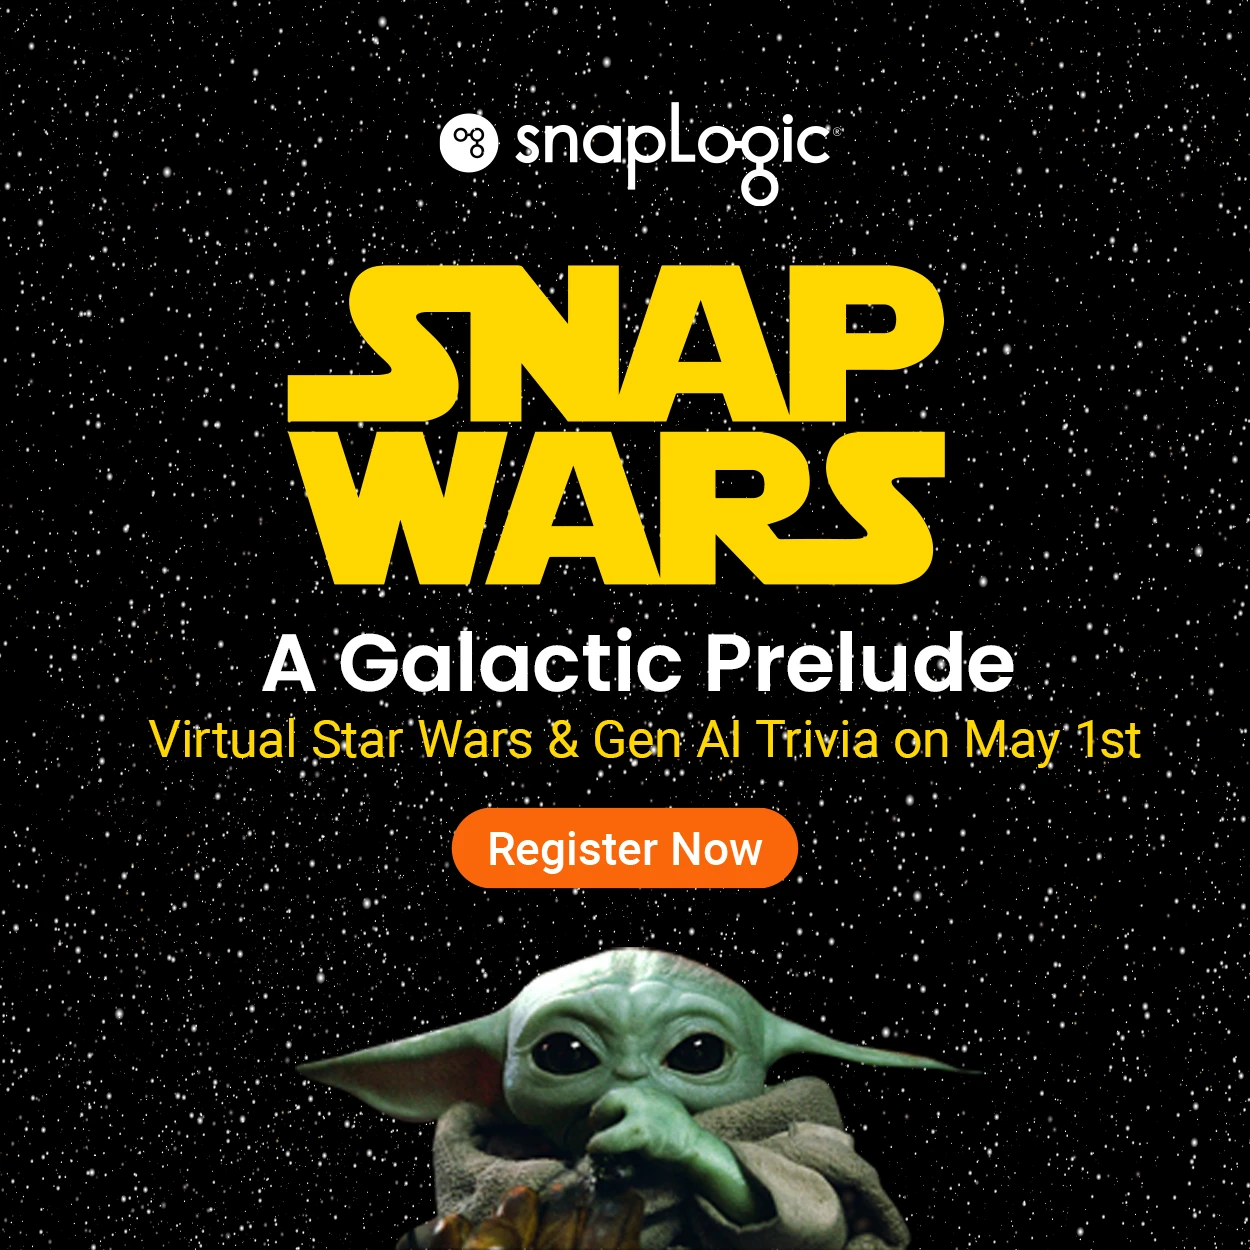 SnapWars A Galatic Prelude: Virtual Star Wars and Gen AI Trivia on May 1st